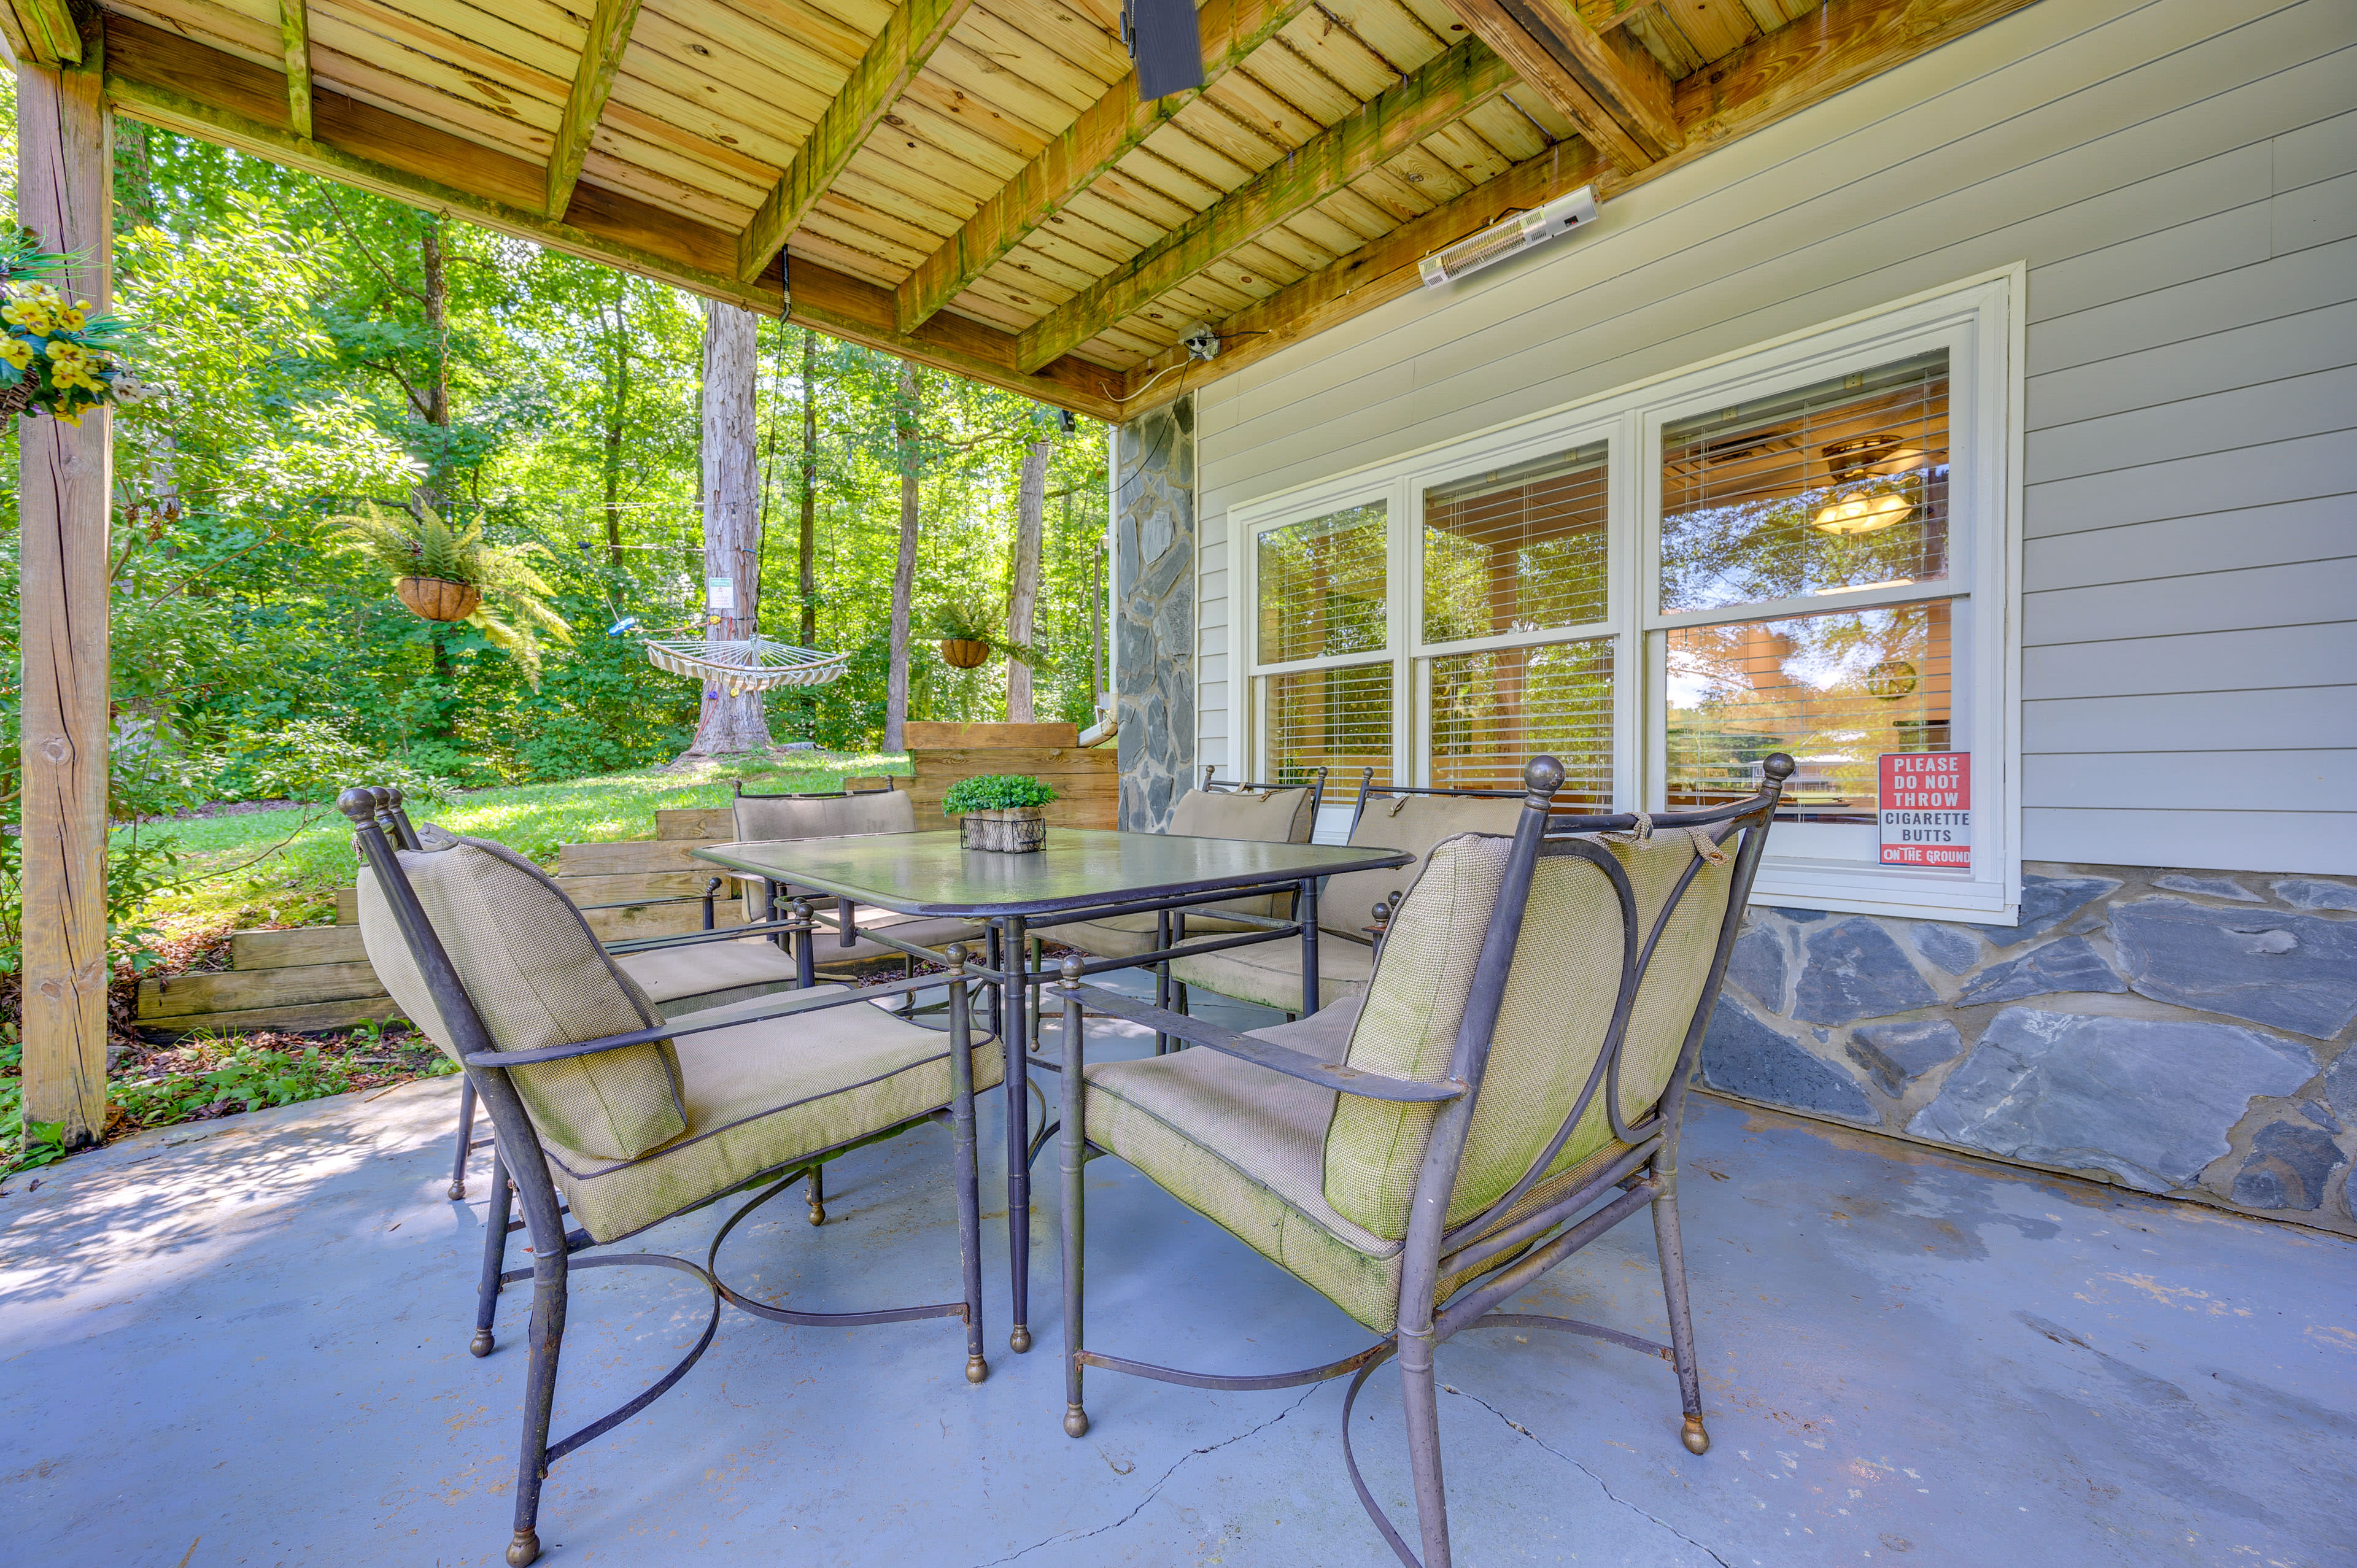 Covered Patio | Outdoor Dining | Gas Grill